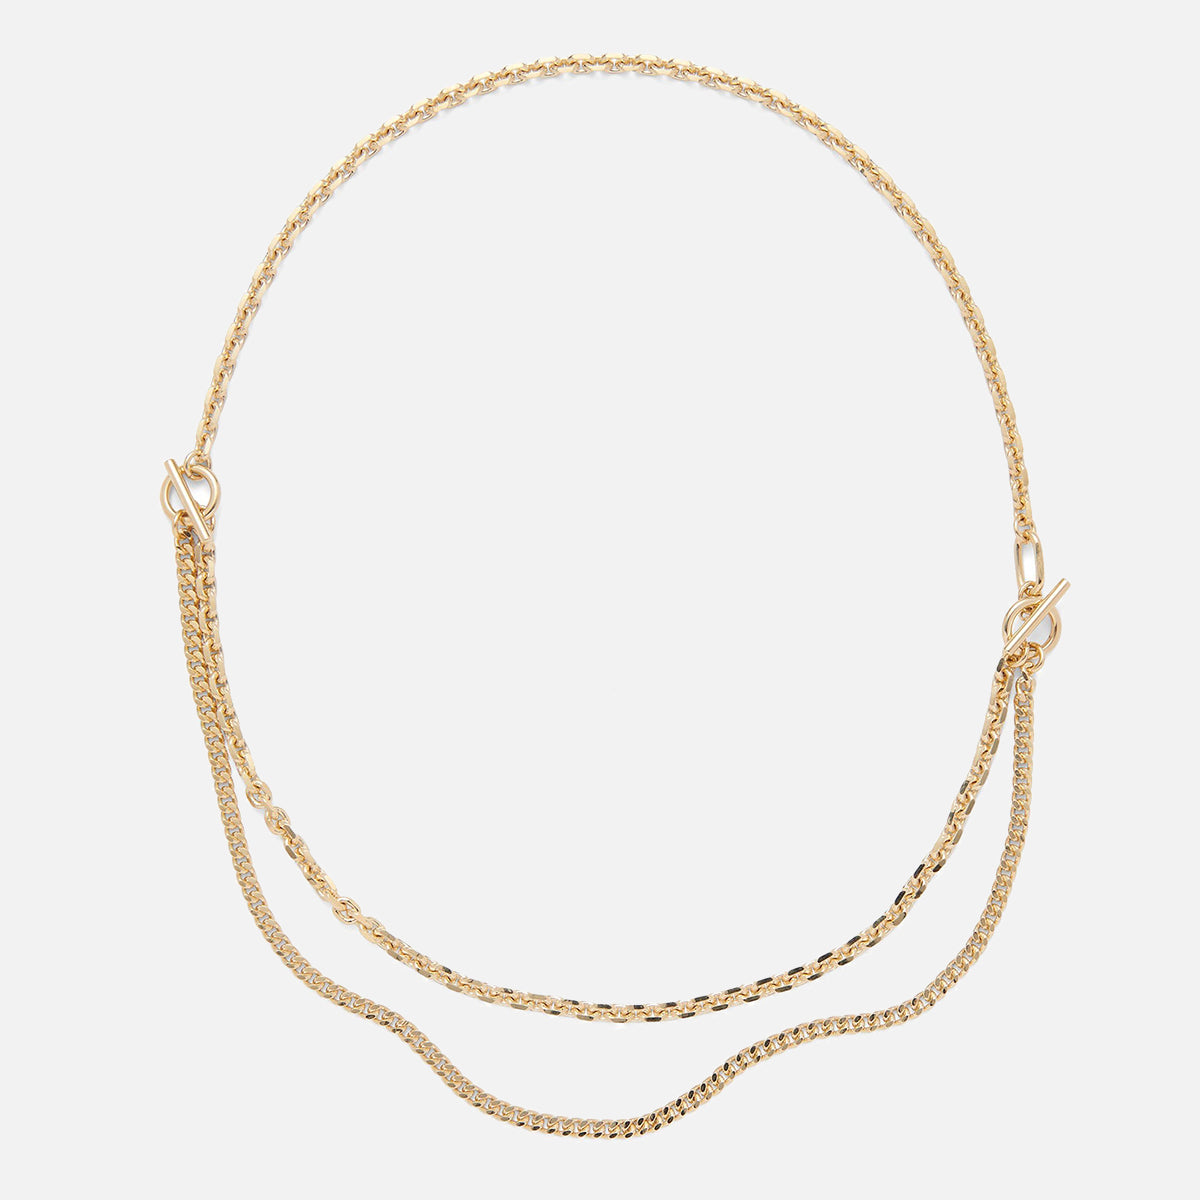 3 Way Necklace in Gold